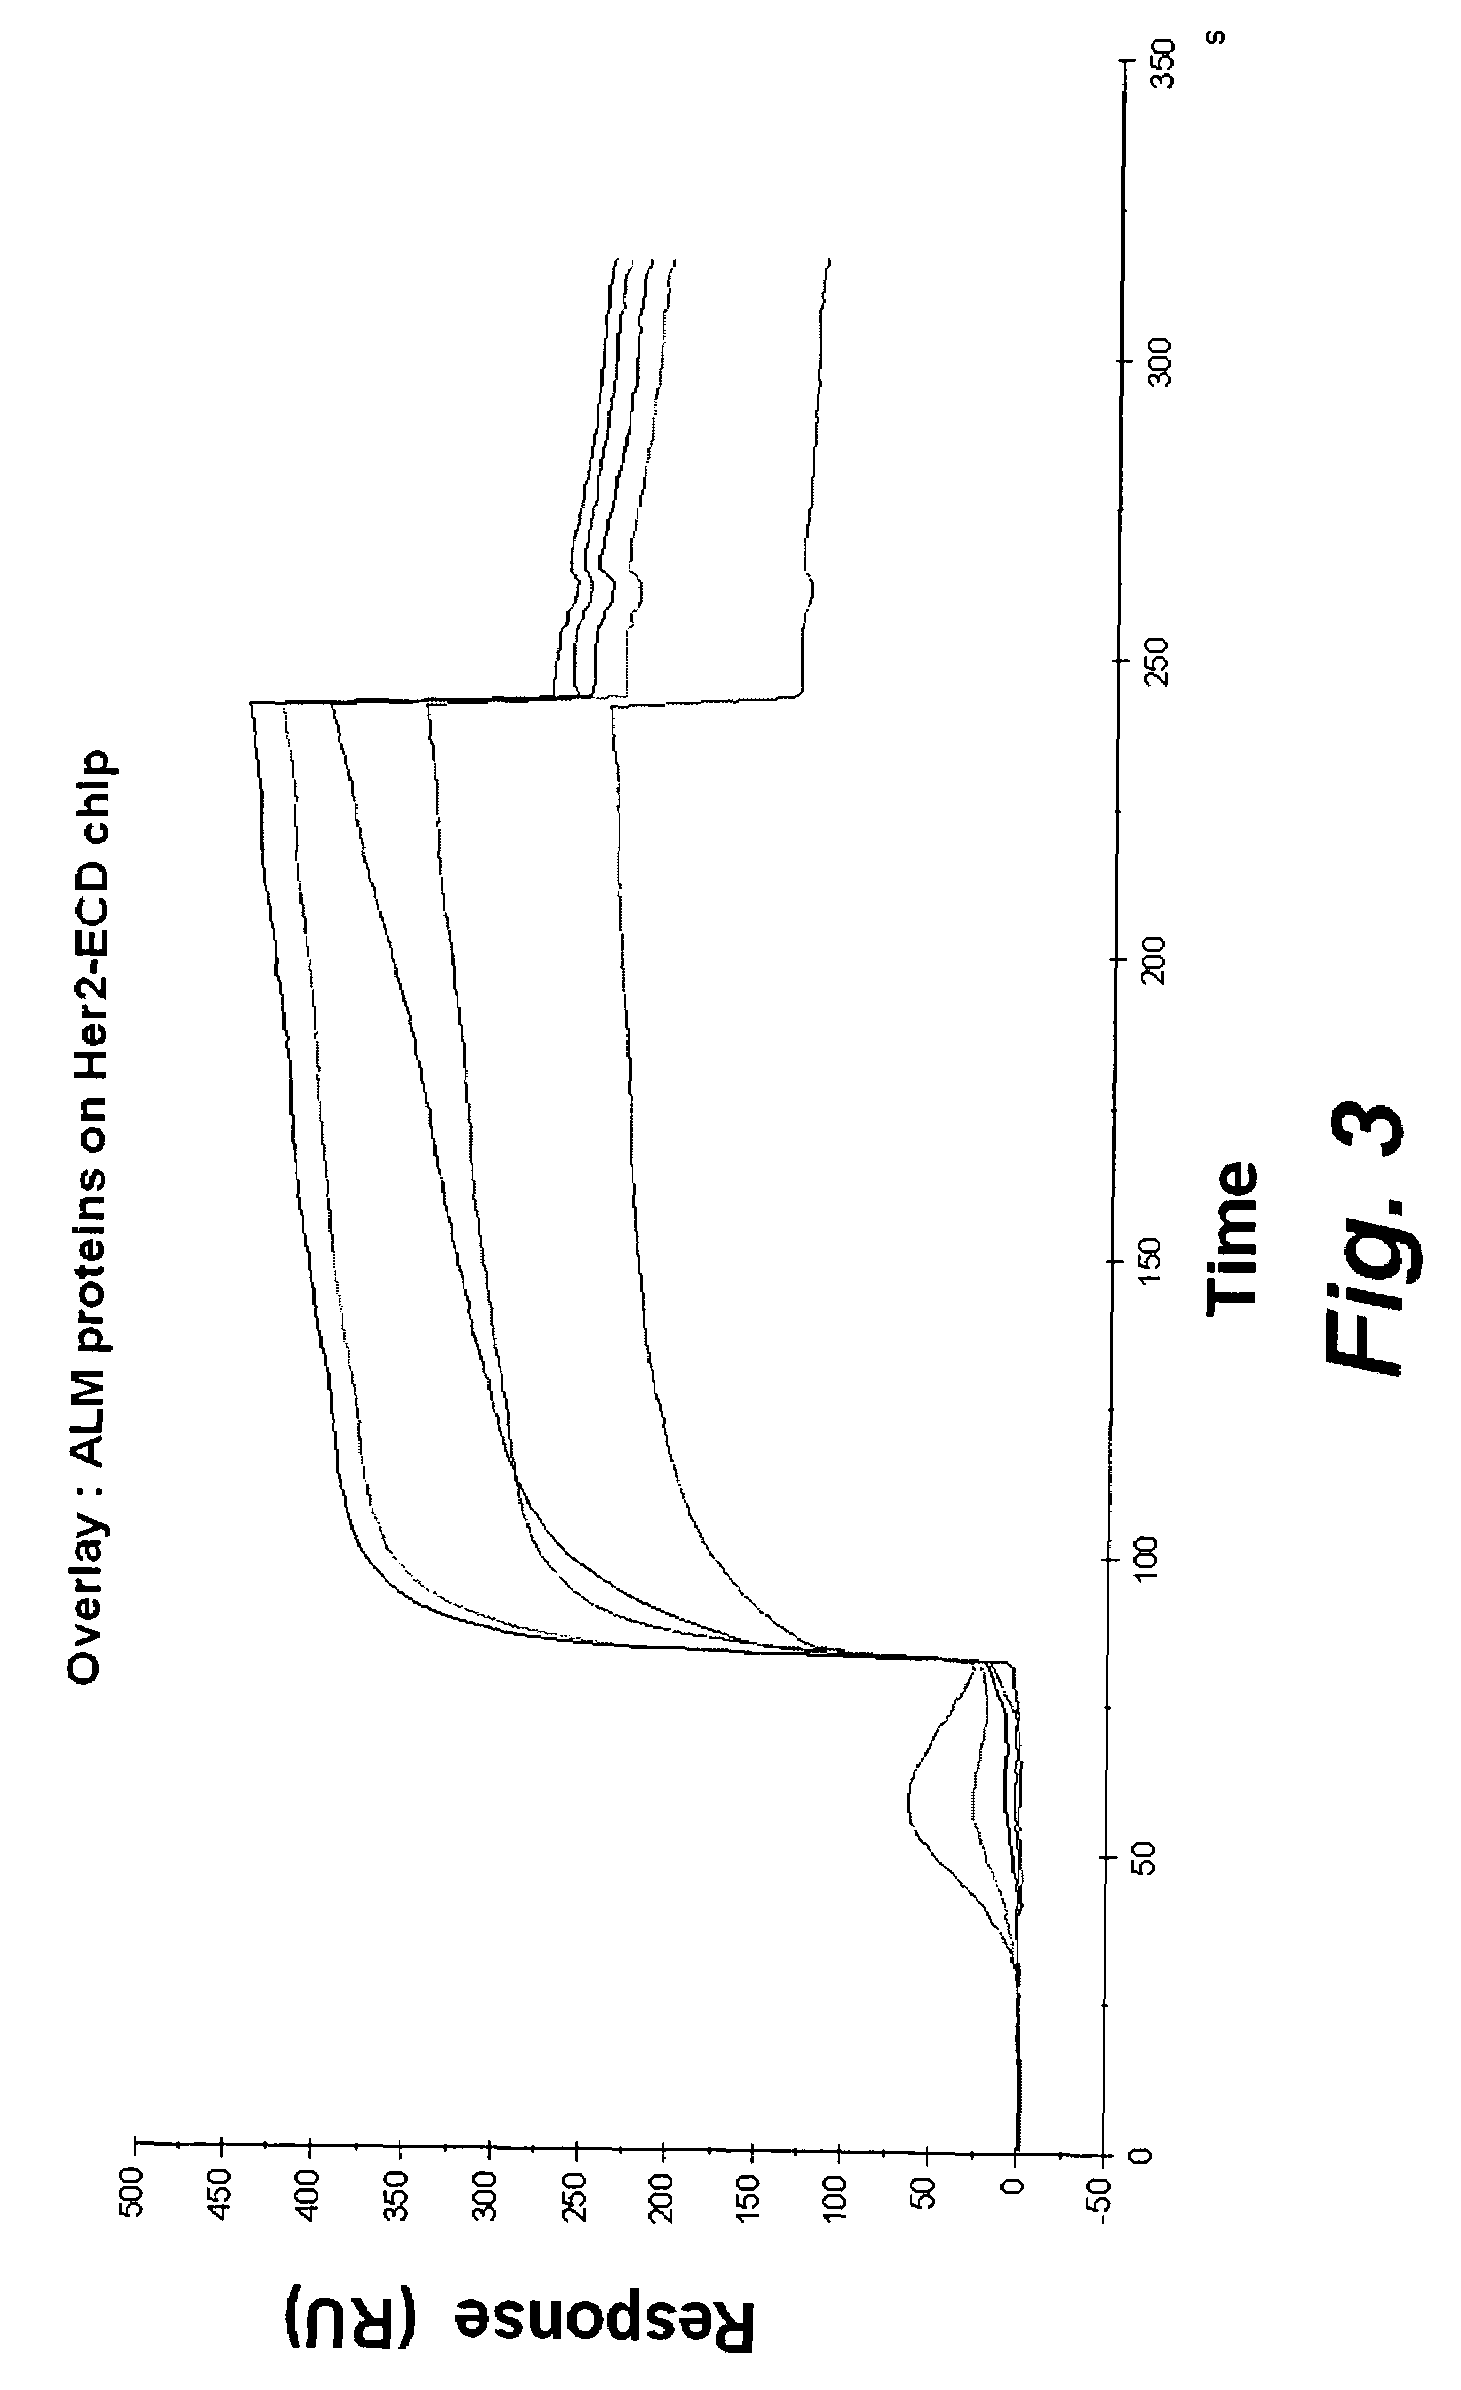 Bispecific single chain Fv antibody molecules and methods of use thereof